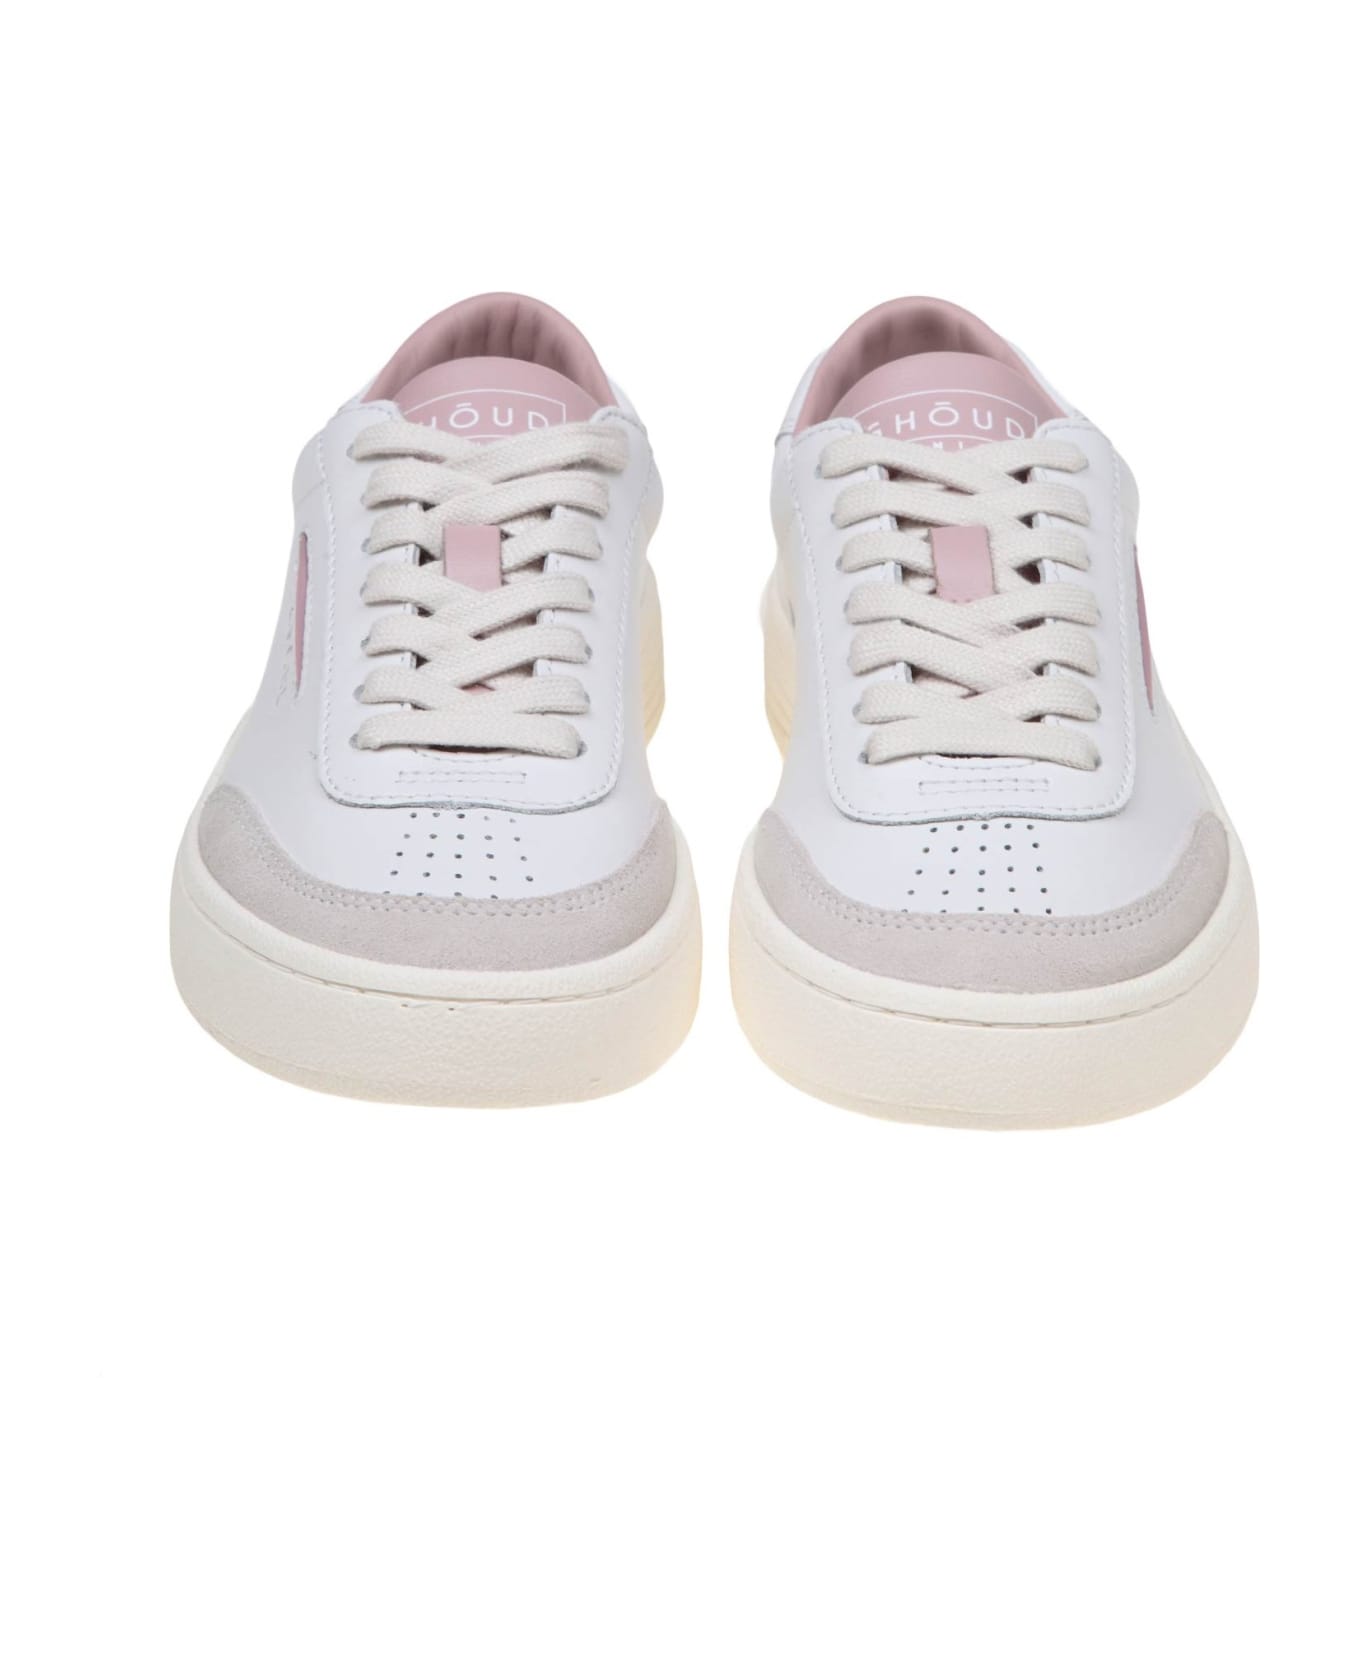 GHOUD Lido Low Sneakers In White/pink Leather And Suede - Pink